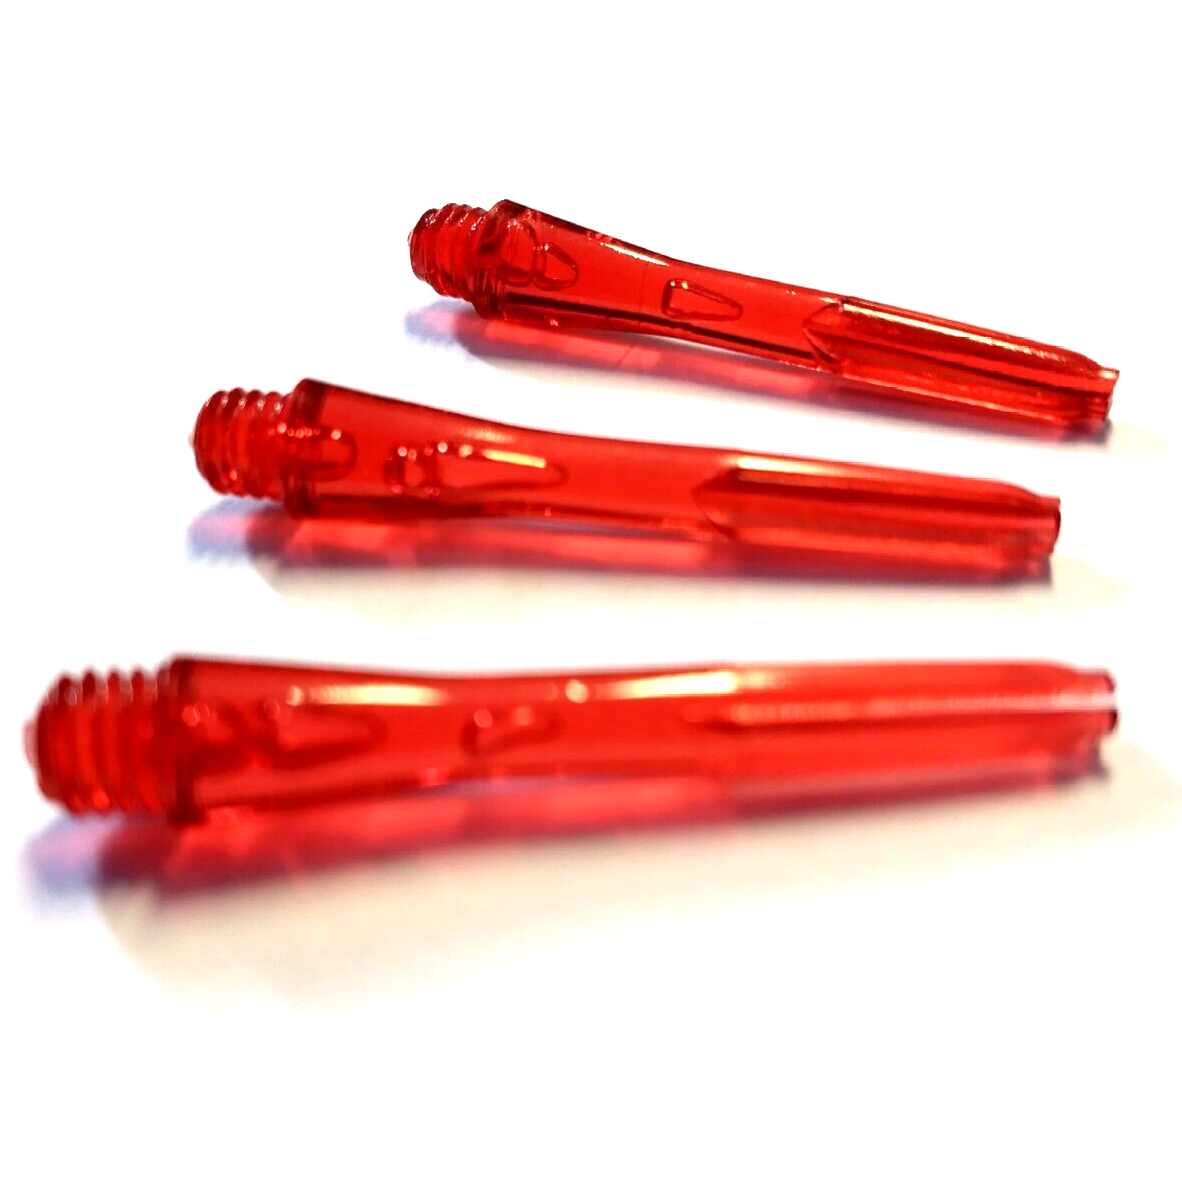 1/4 Inch Thread Darts Stems - Red Polycarbonate